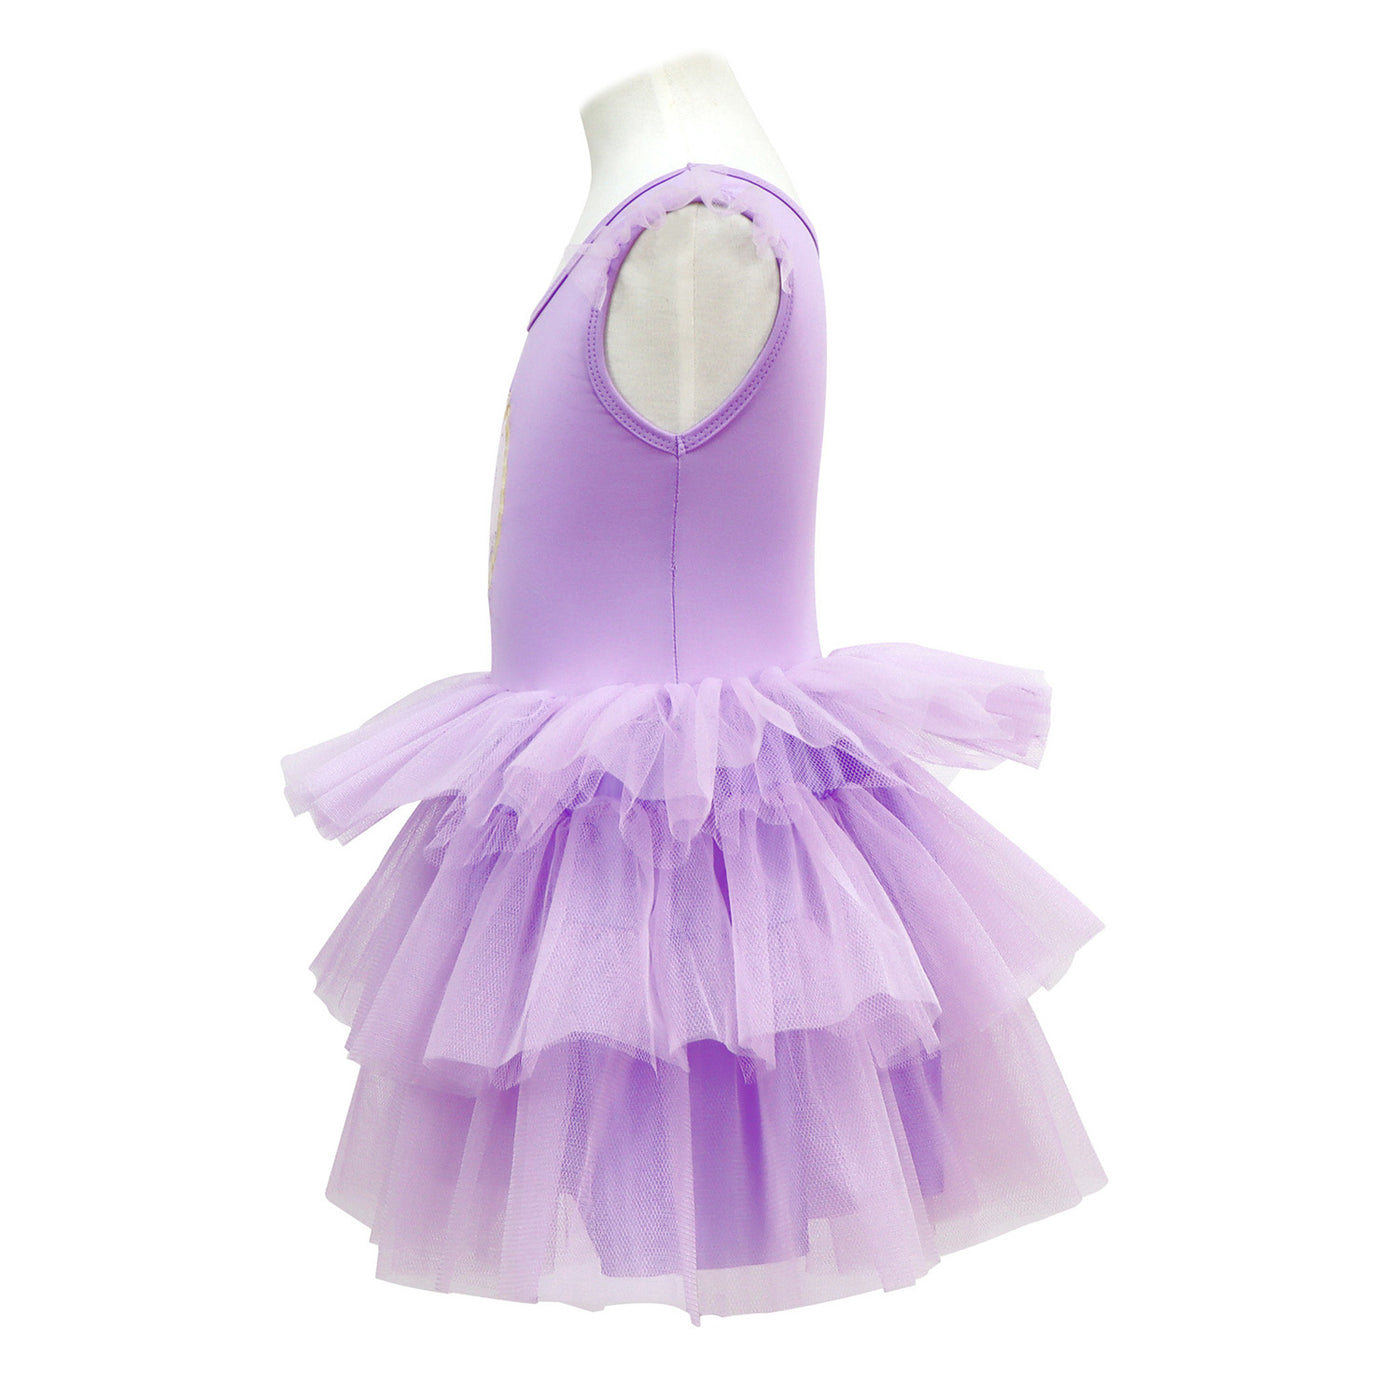 Portrait Tulle Dress in Lilac